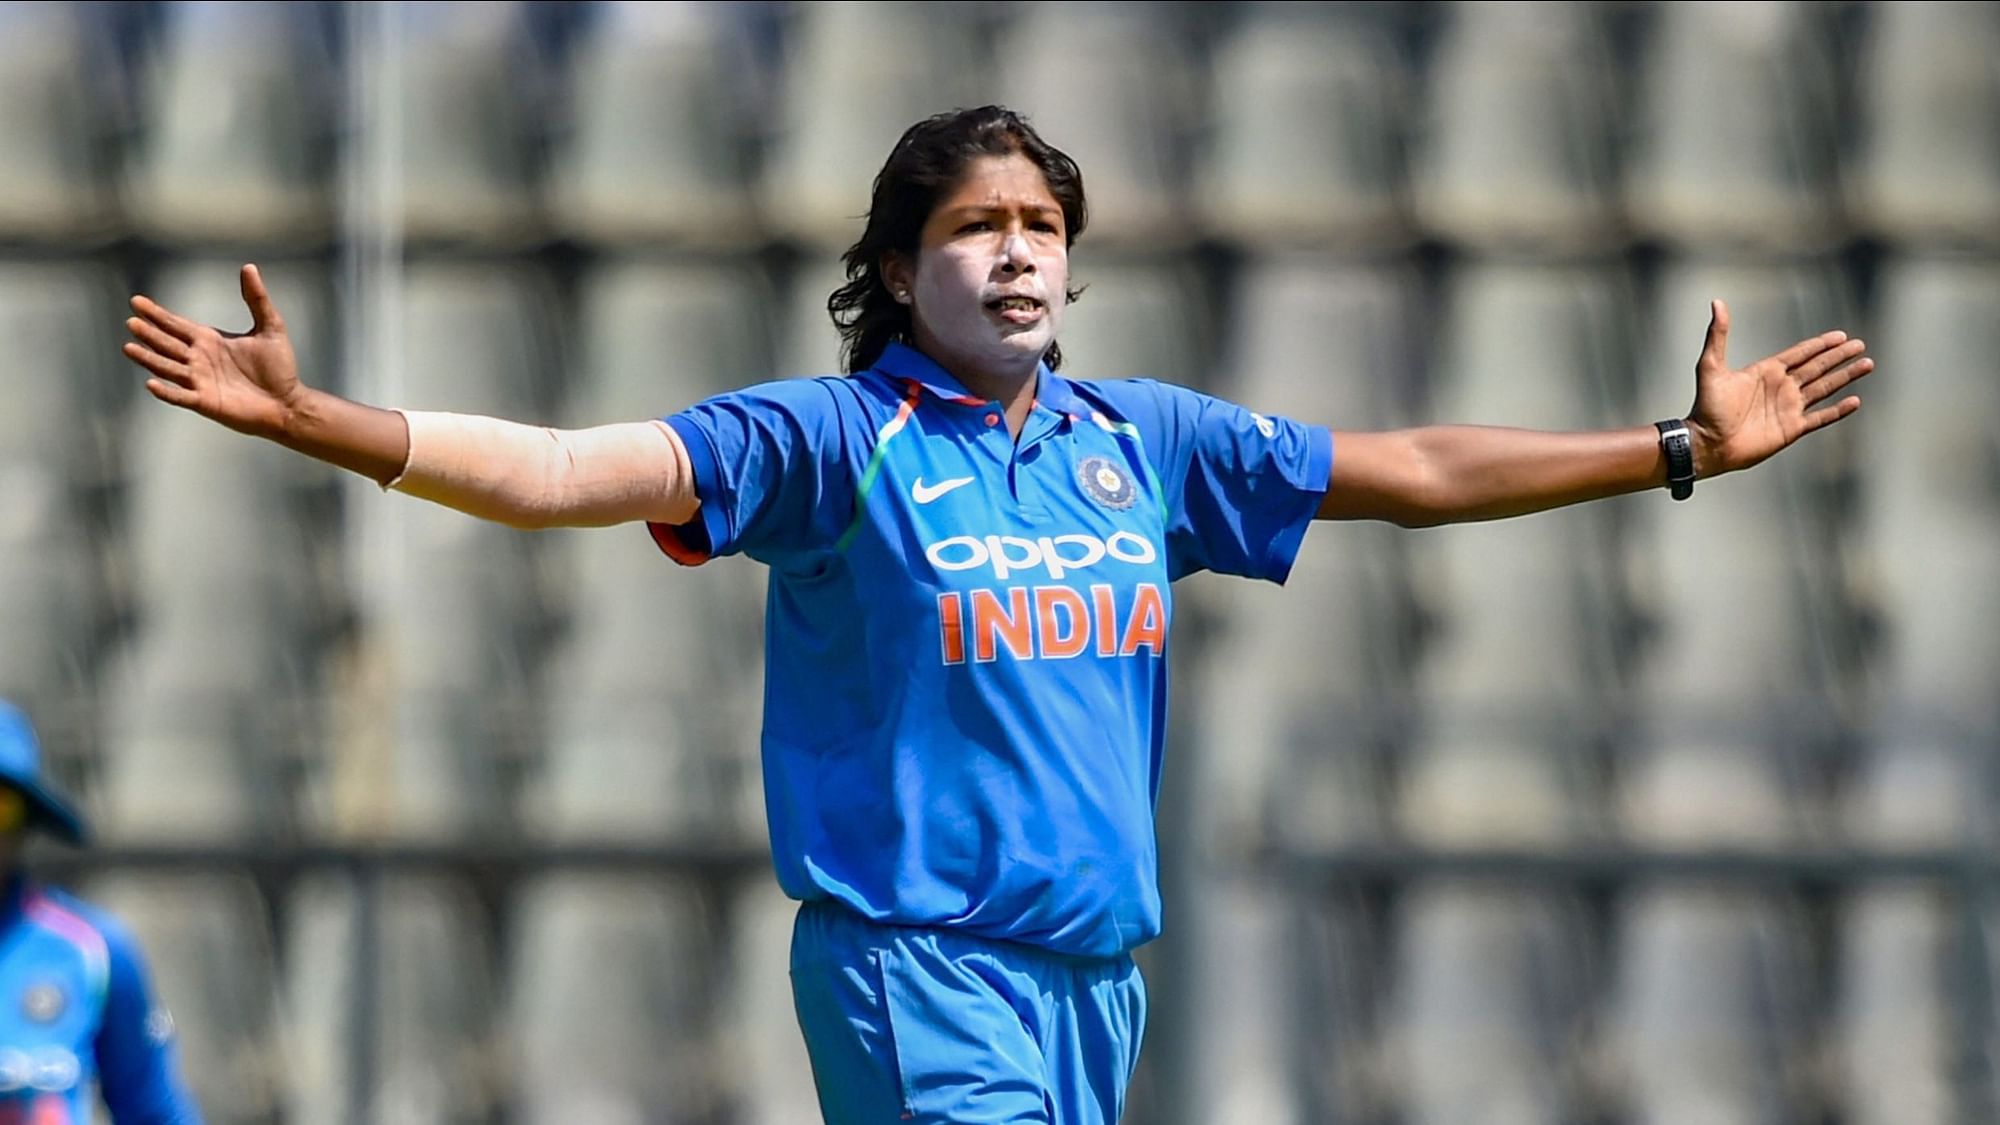 India’s veteran pacer Jhulan Goswami rose to the summit of the ICC women’s rankings for ODI bowlers.